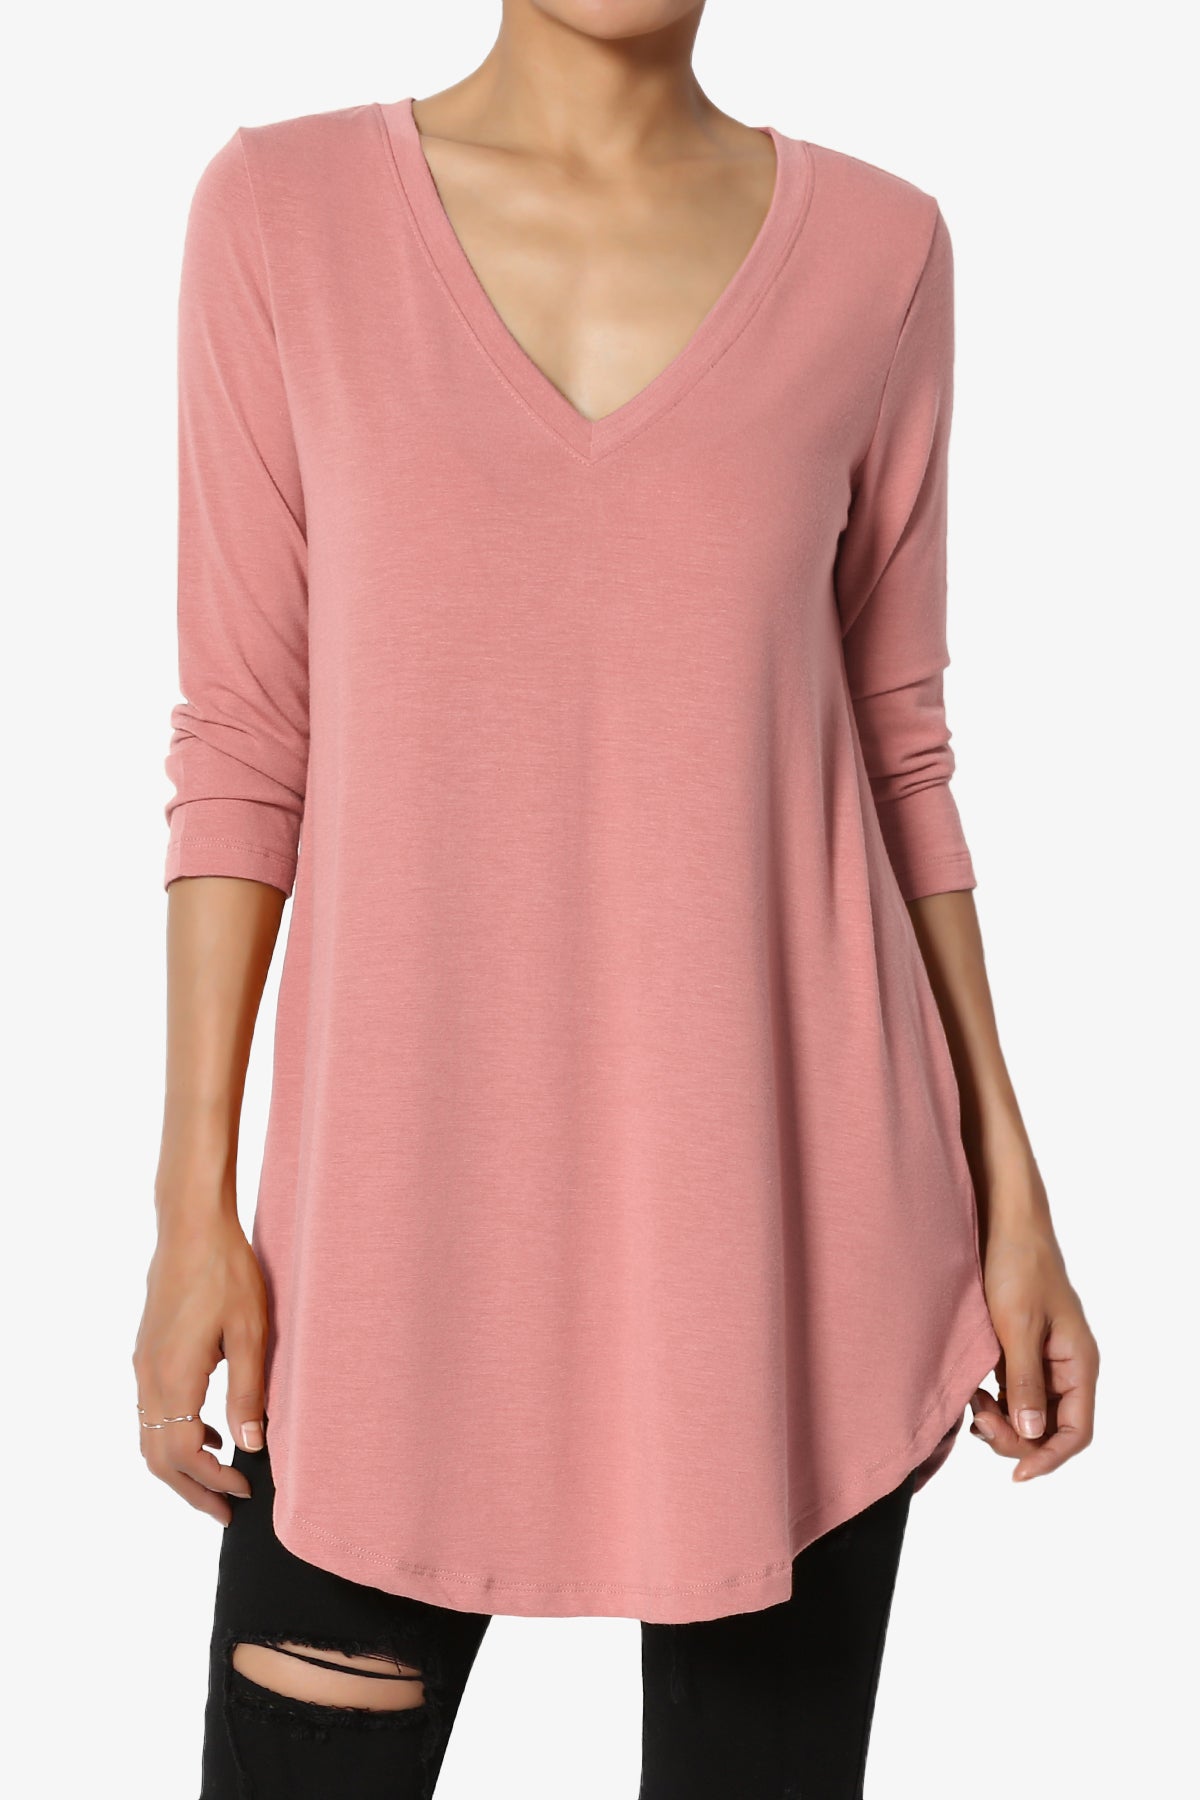 Load image into Gallery viewer, Ramada 3/4 Sleeve Flowy Jersey Top DUSTY ROSE_1
